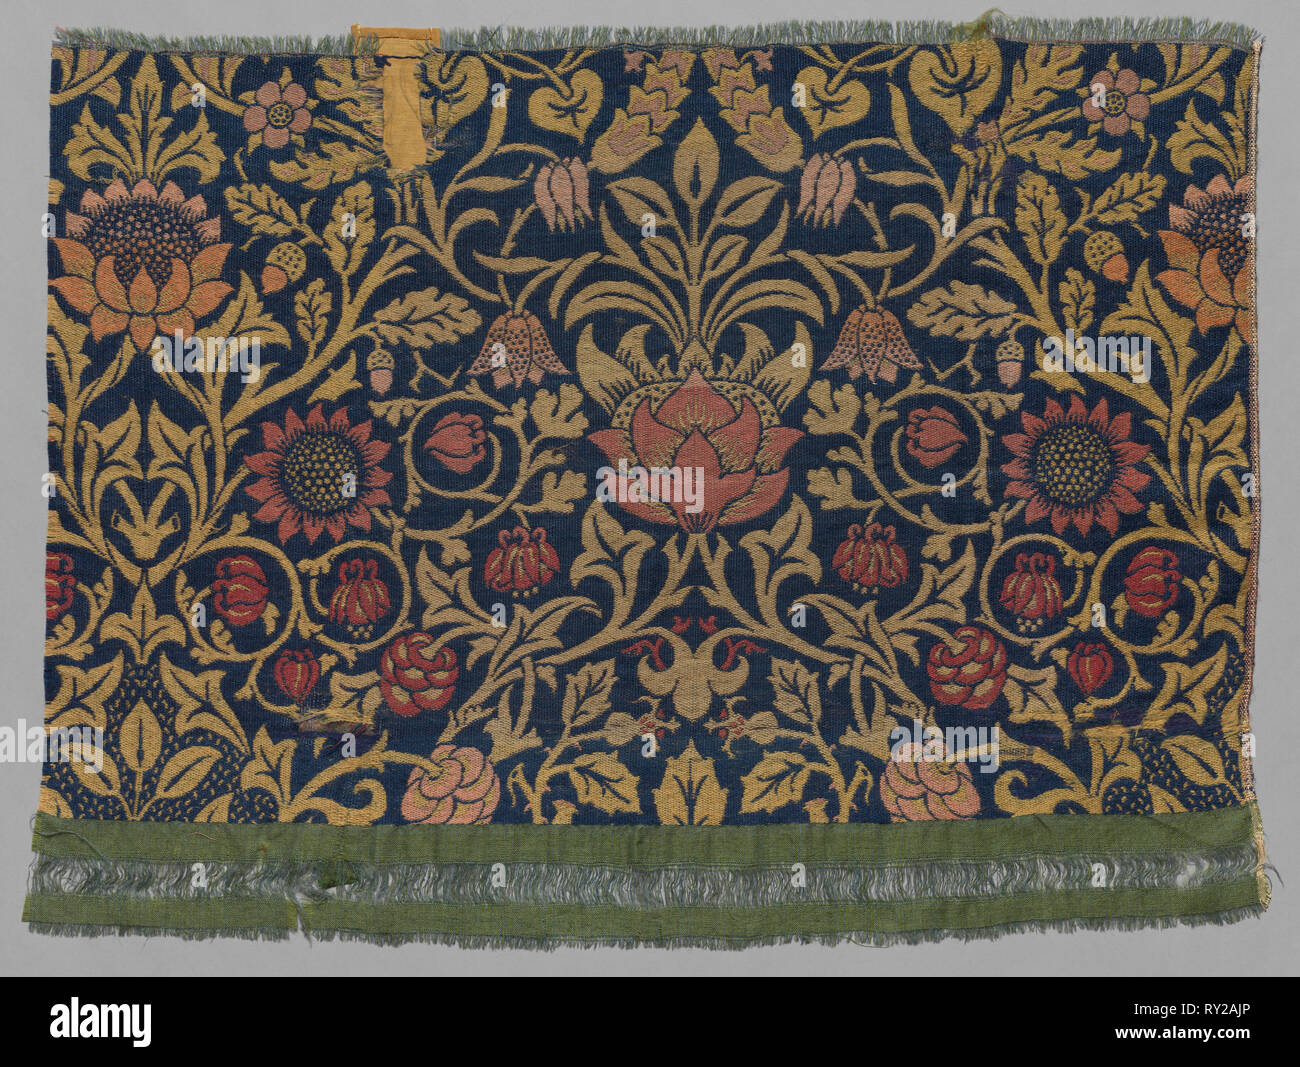 Violet and Columbine, 1883. William Morris (British, 1834-1896). Jacquard loom woven weft-faced twill, double cloth; wool and mohair Stock Photo